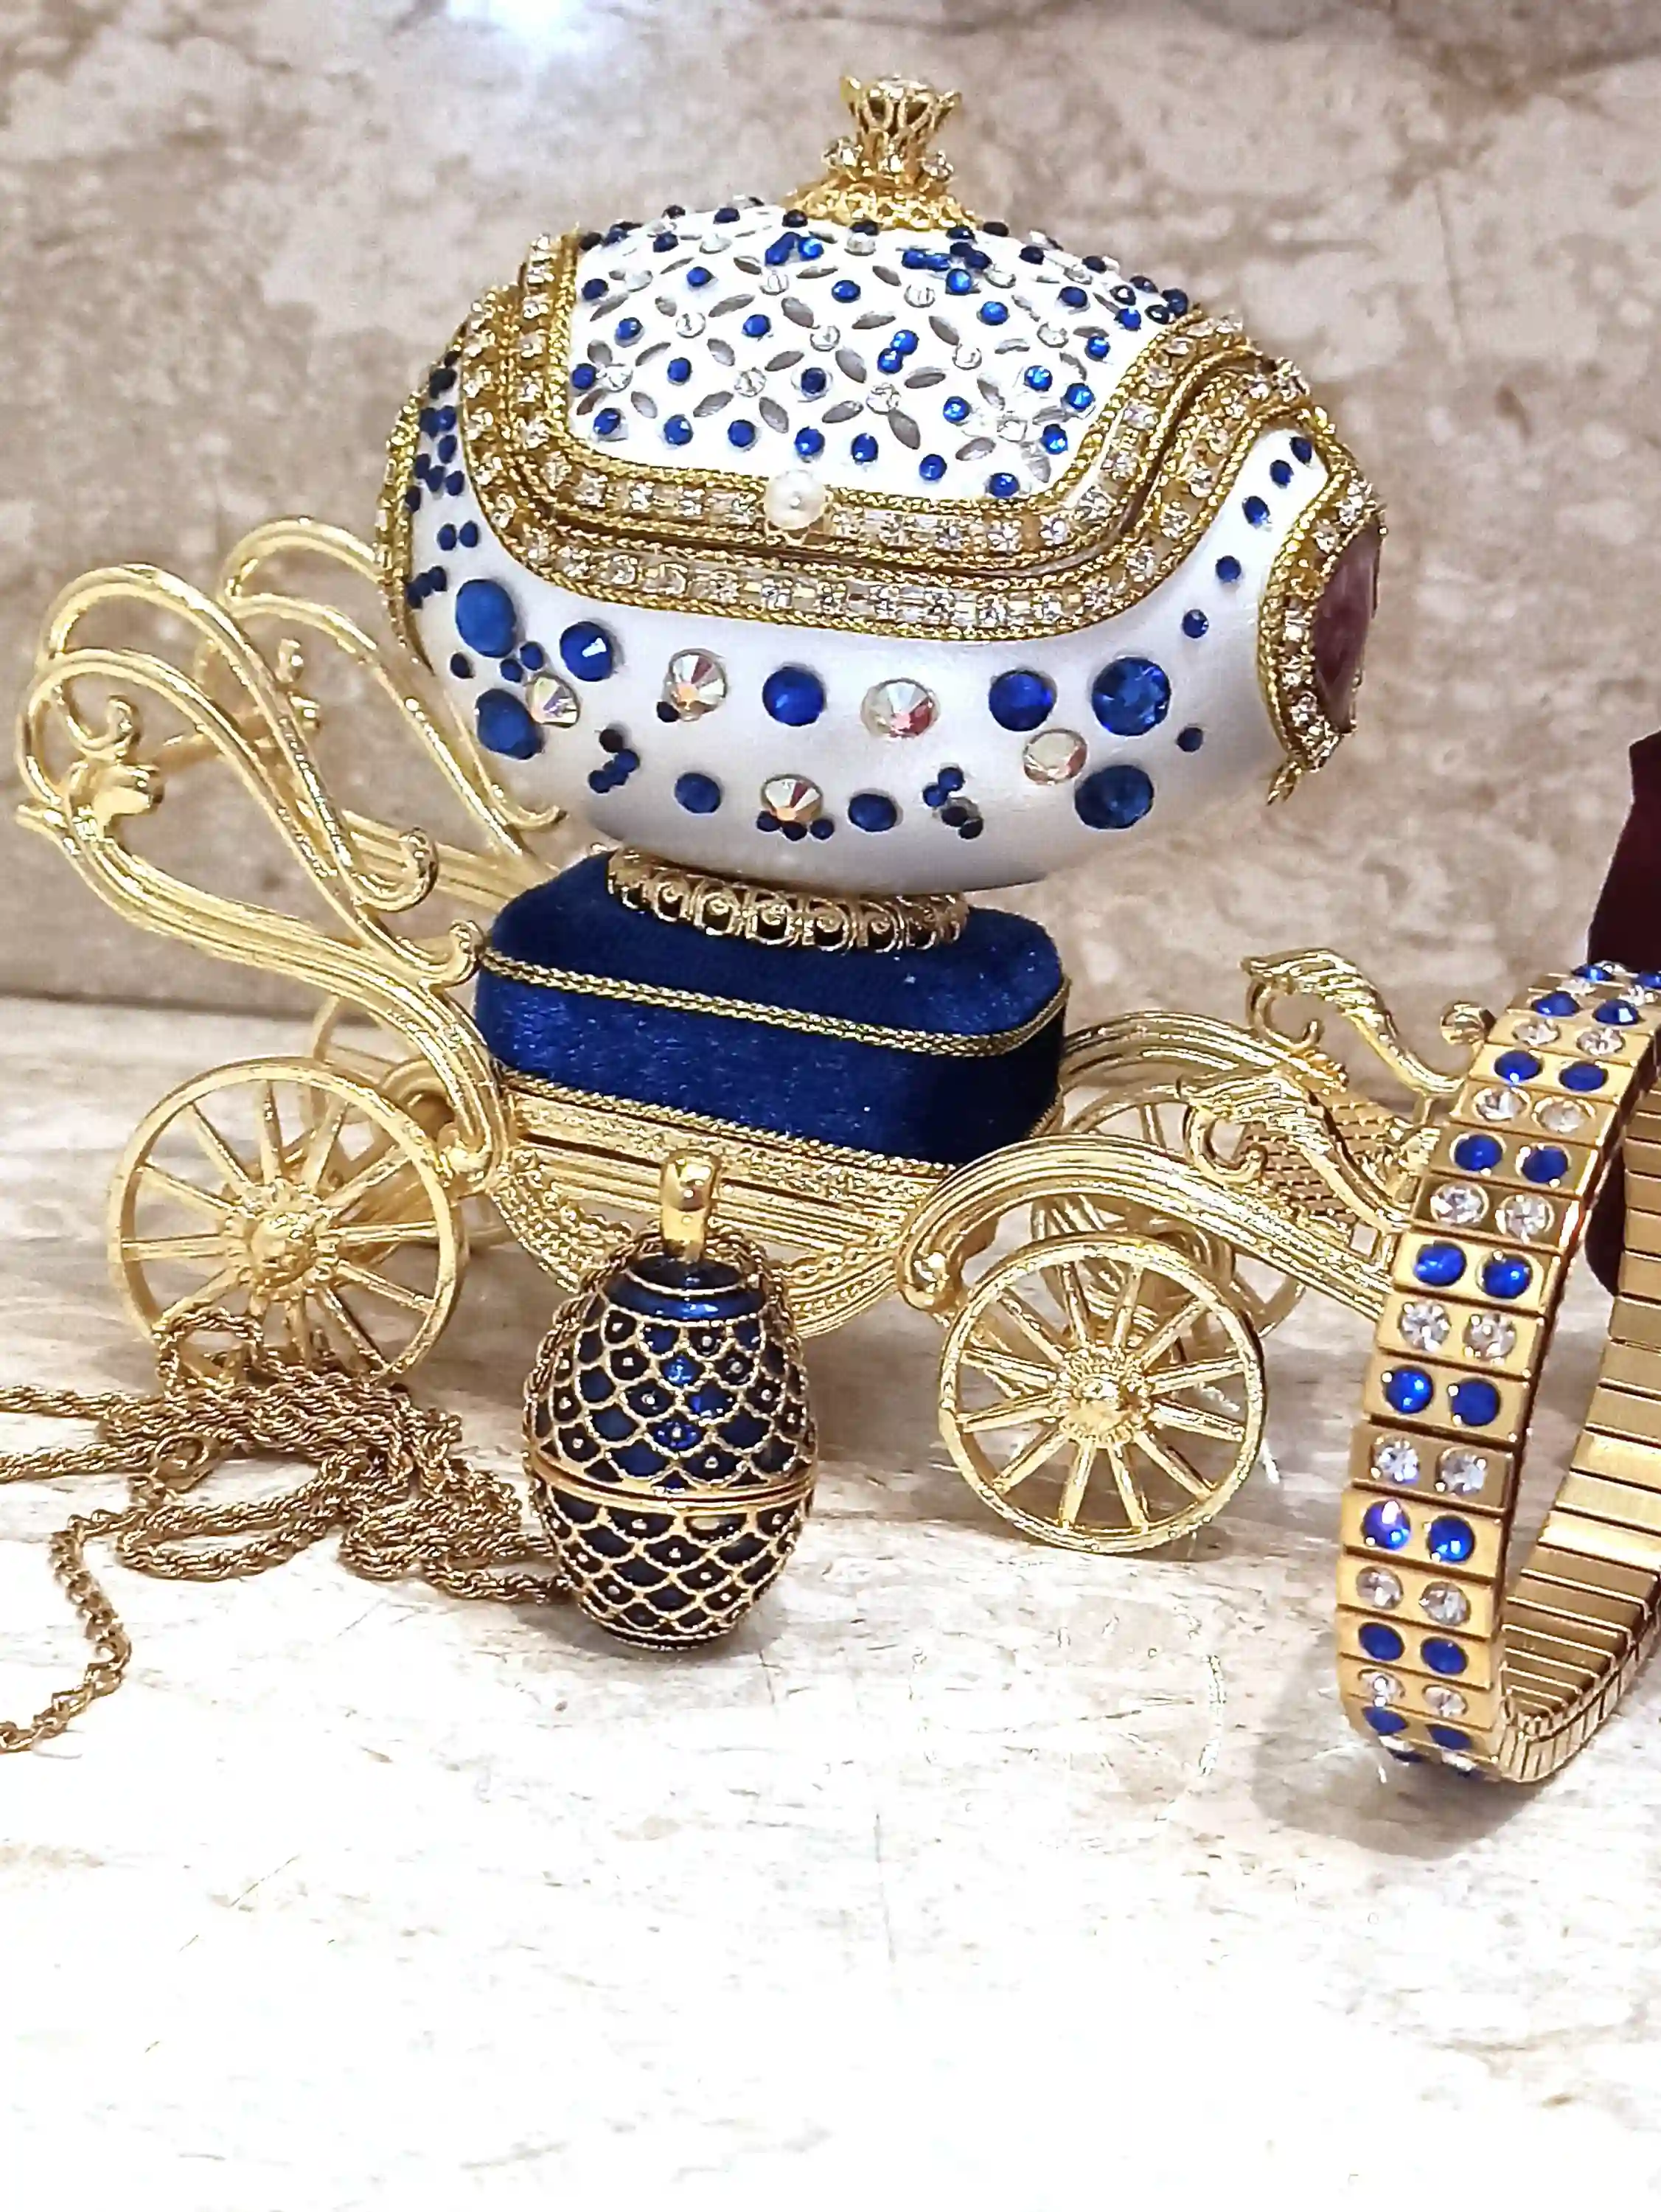 Faberge Egg Jewelry box, Plus Faberge NECKLACE, Austrian Crystal Sapphire BRACELET, 24k GOLD, Musical, Graduate, Birthday Gift Wife New Mom 